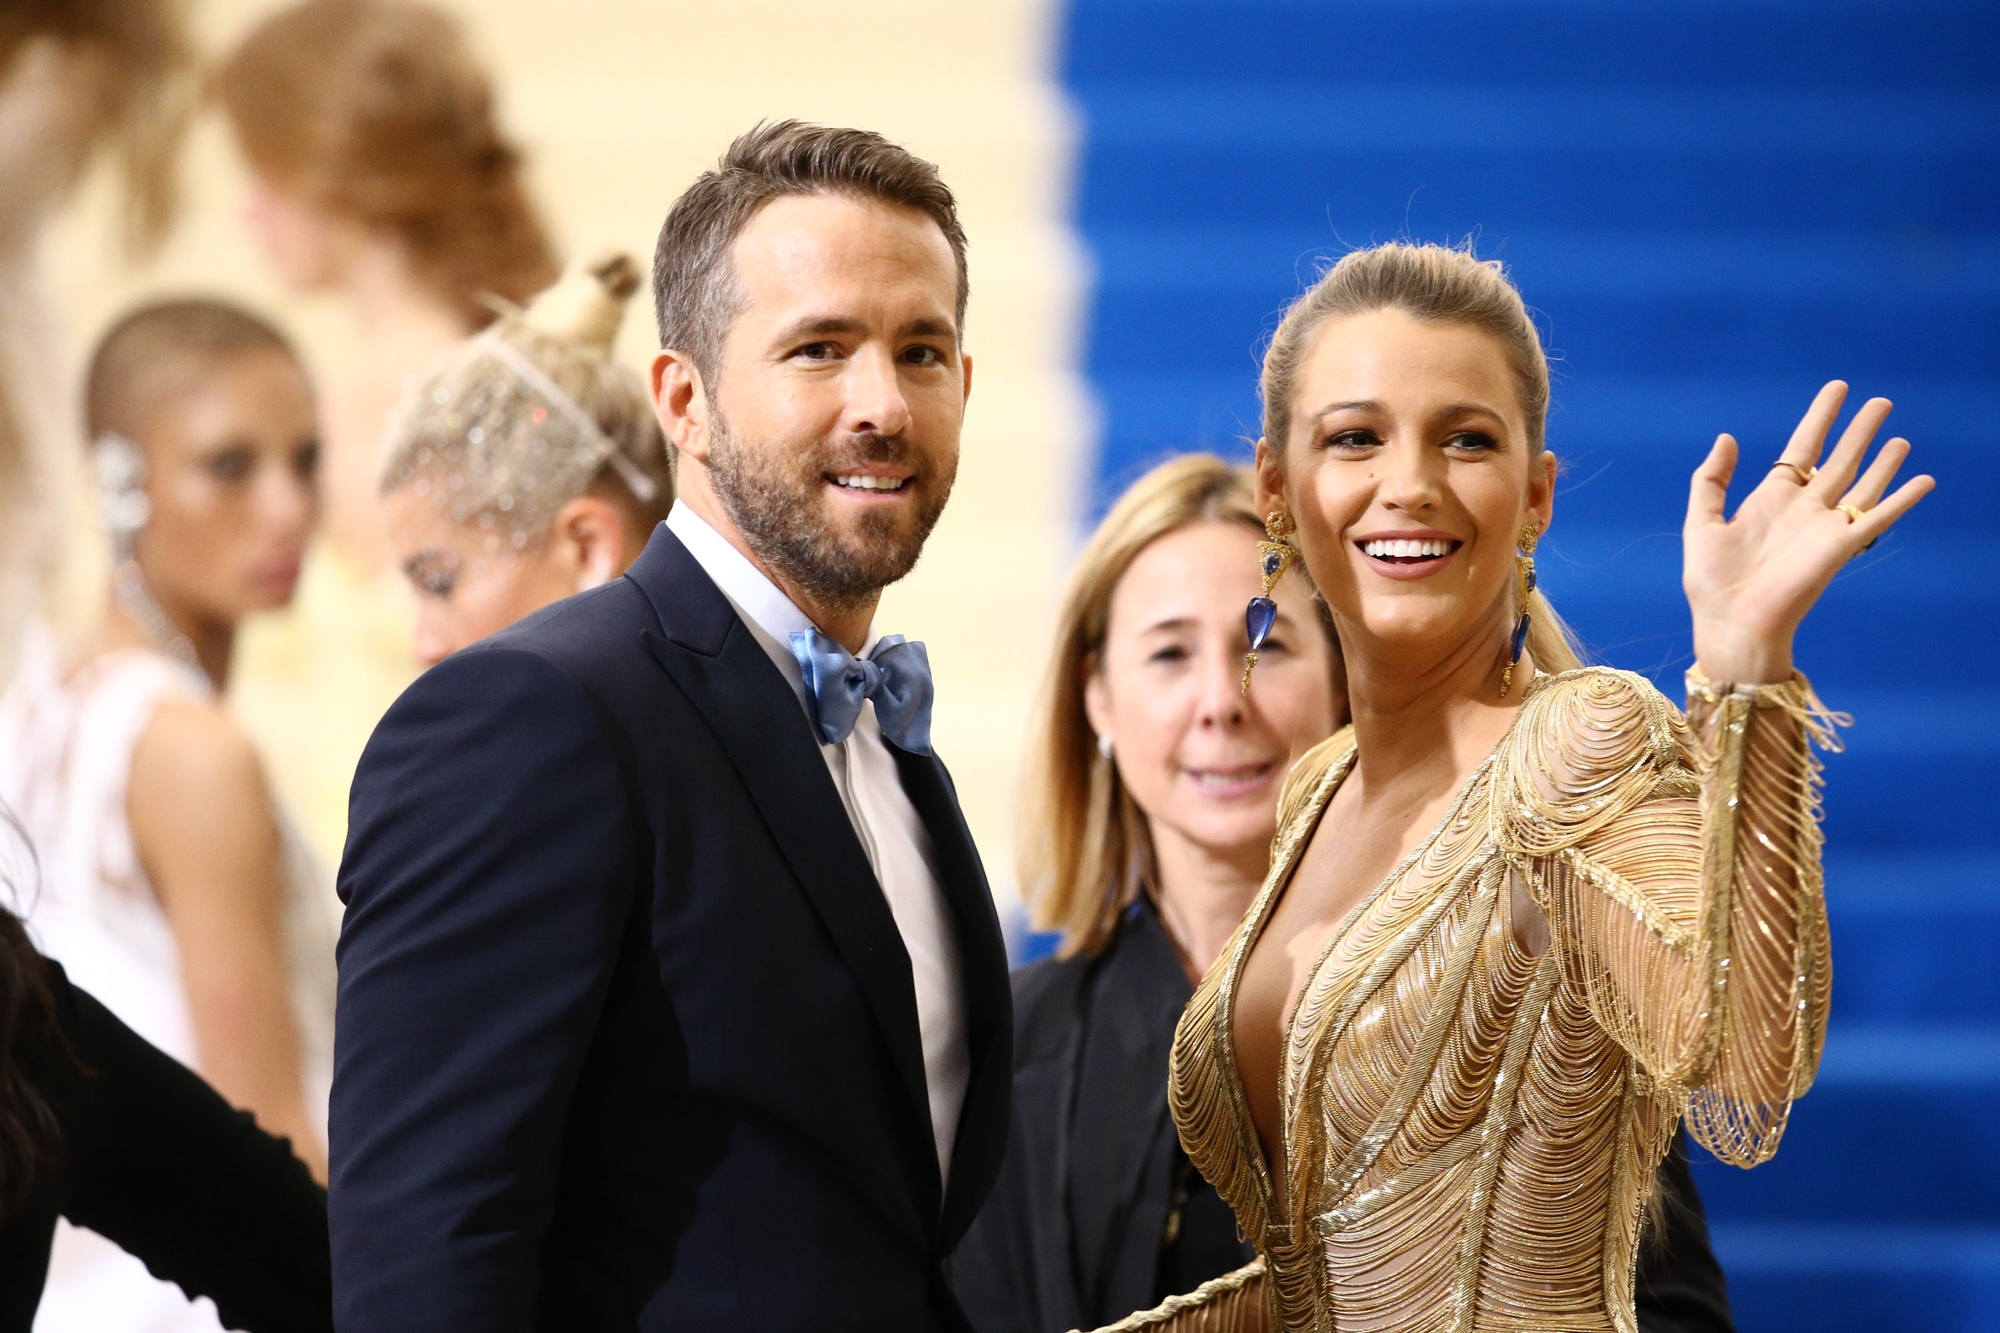 Blake Lively and Ryan Reynolds in a gold dress and tuxedo at an event. Photo via everett225